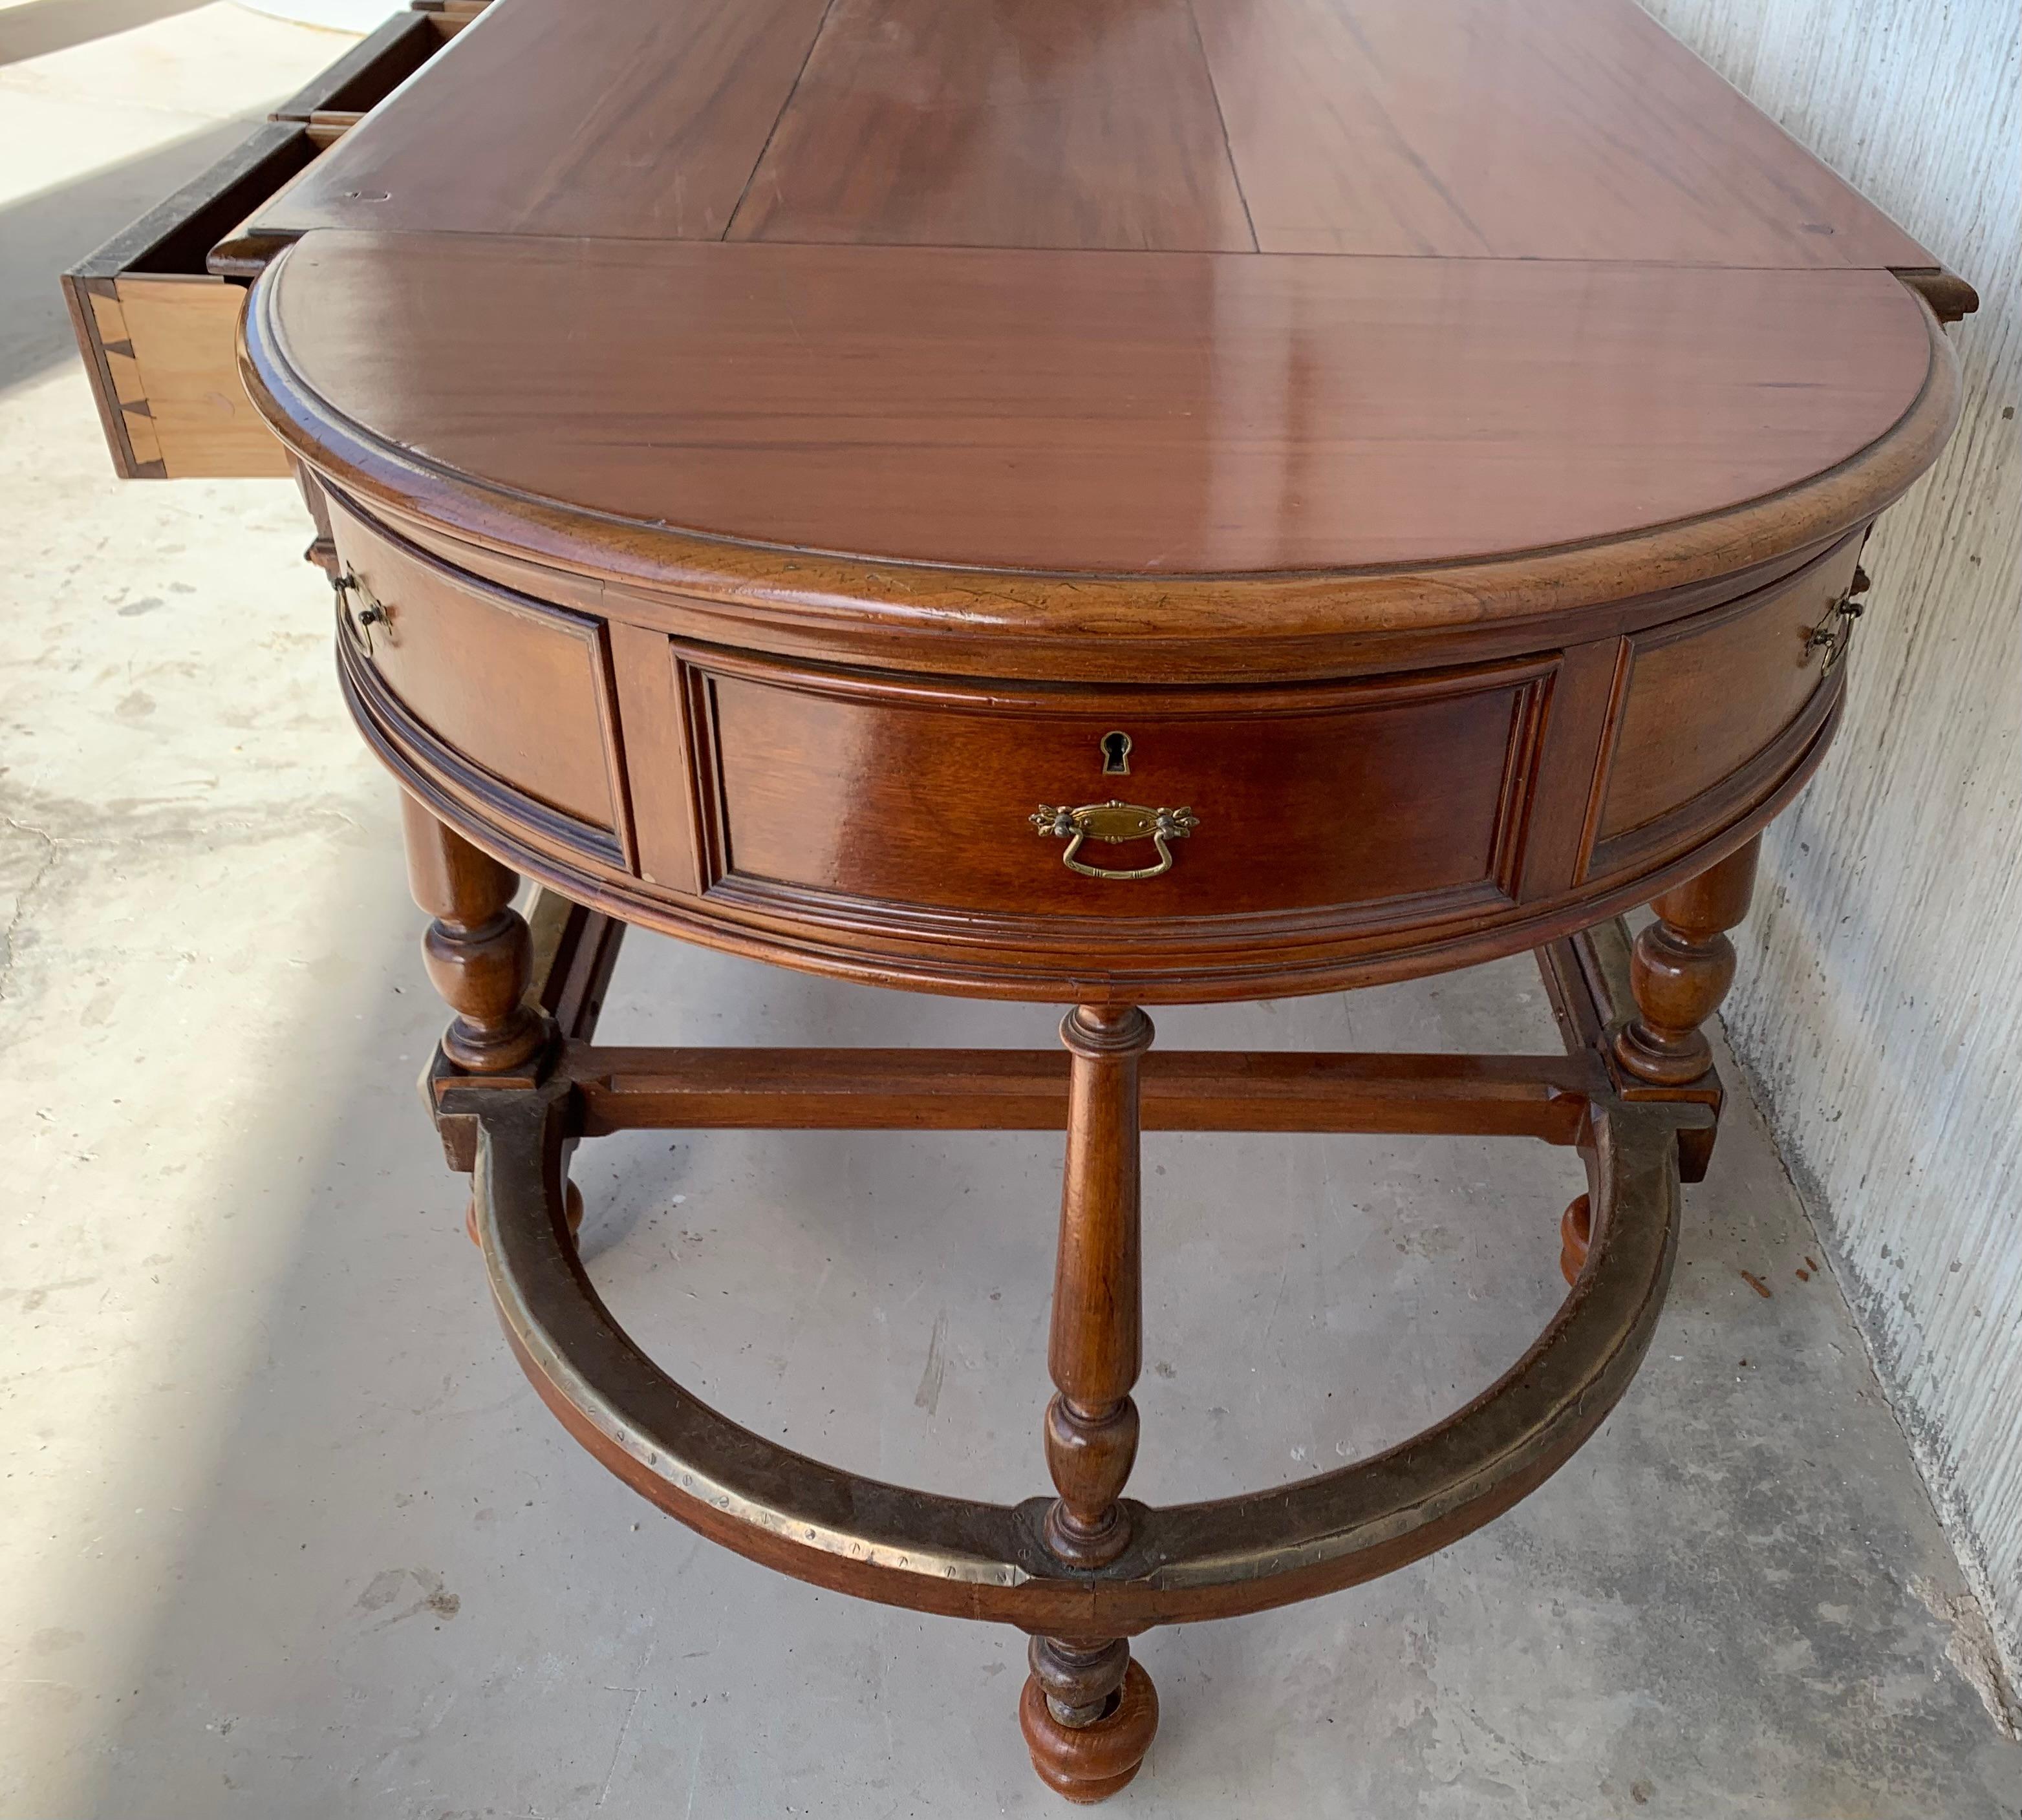 12 Foot Oval Center Table with Drawers in Both Sides, 20th Century For Sale 8